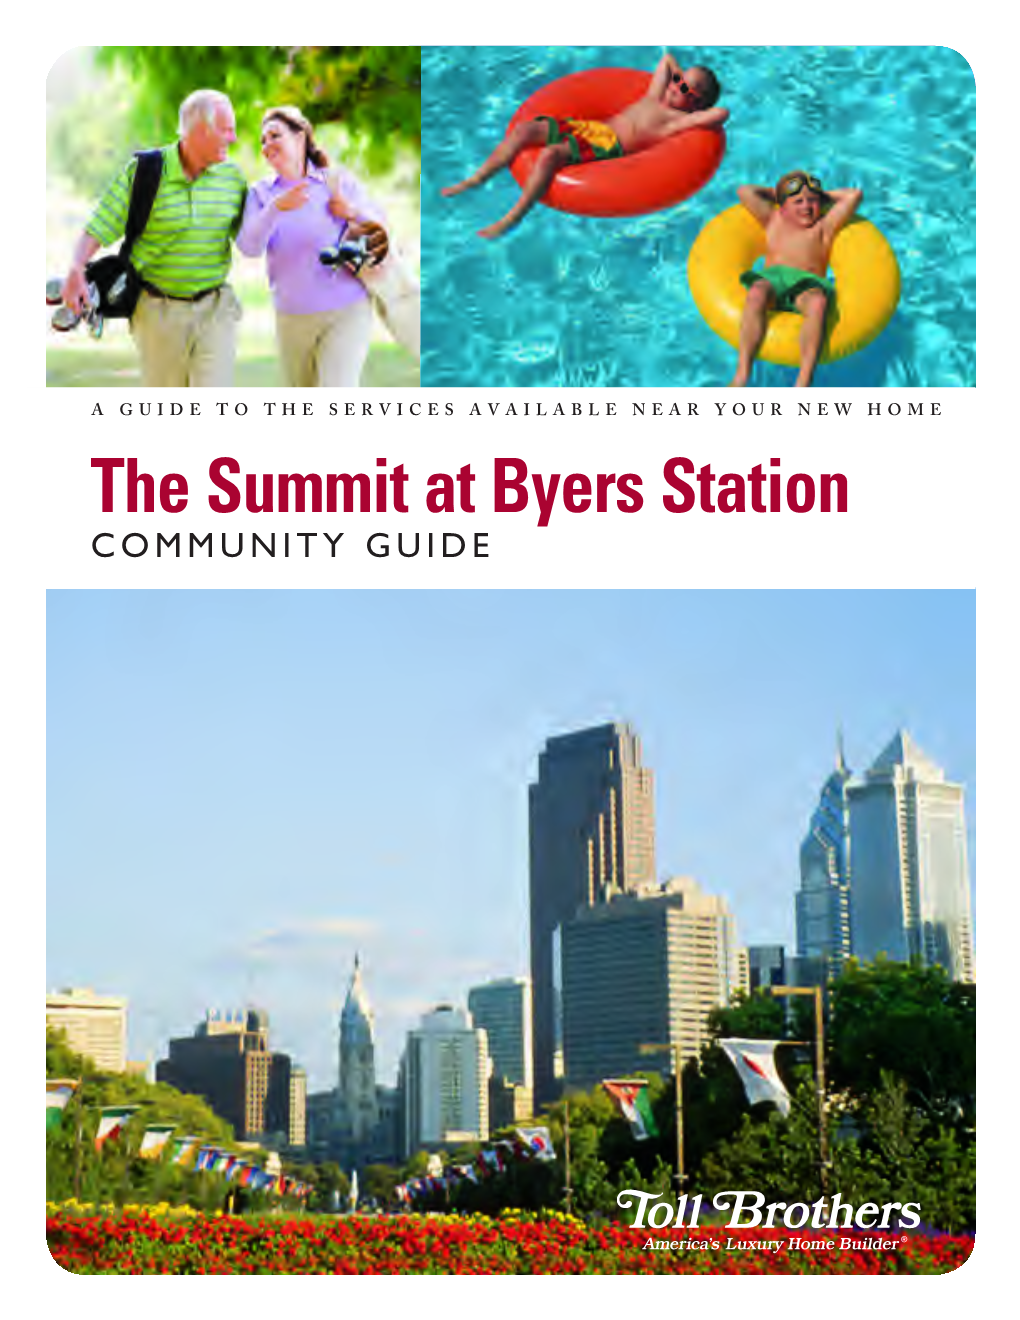 The Summit at Byers Station Community Guide Copyright 2011 Toll Brothers, Inc